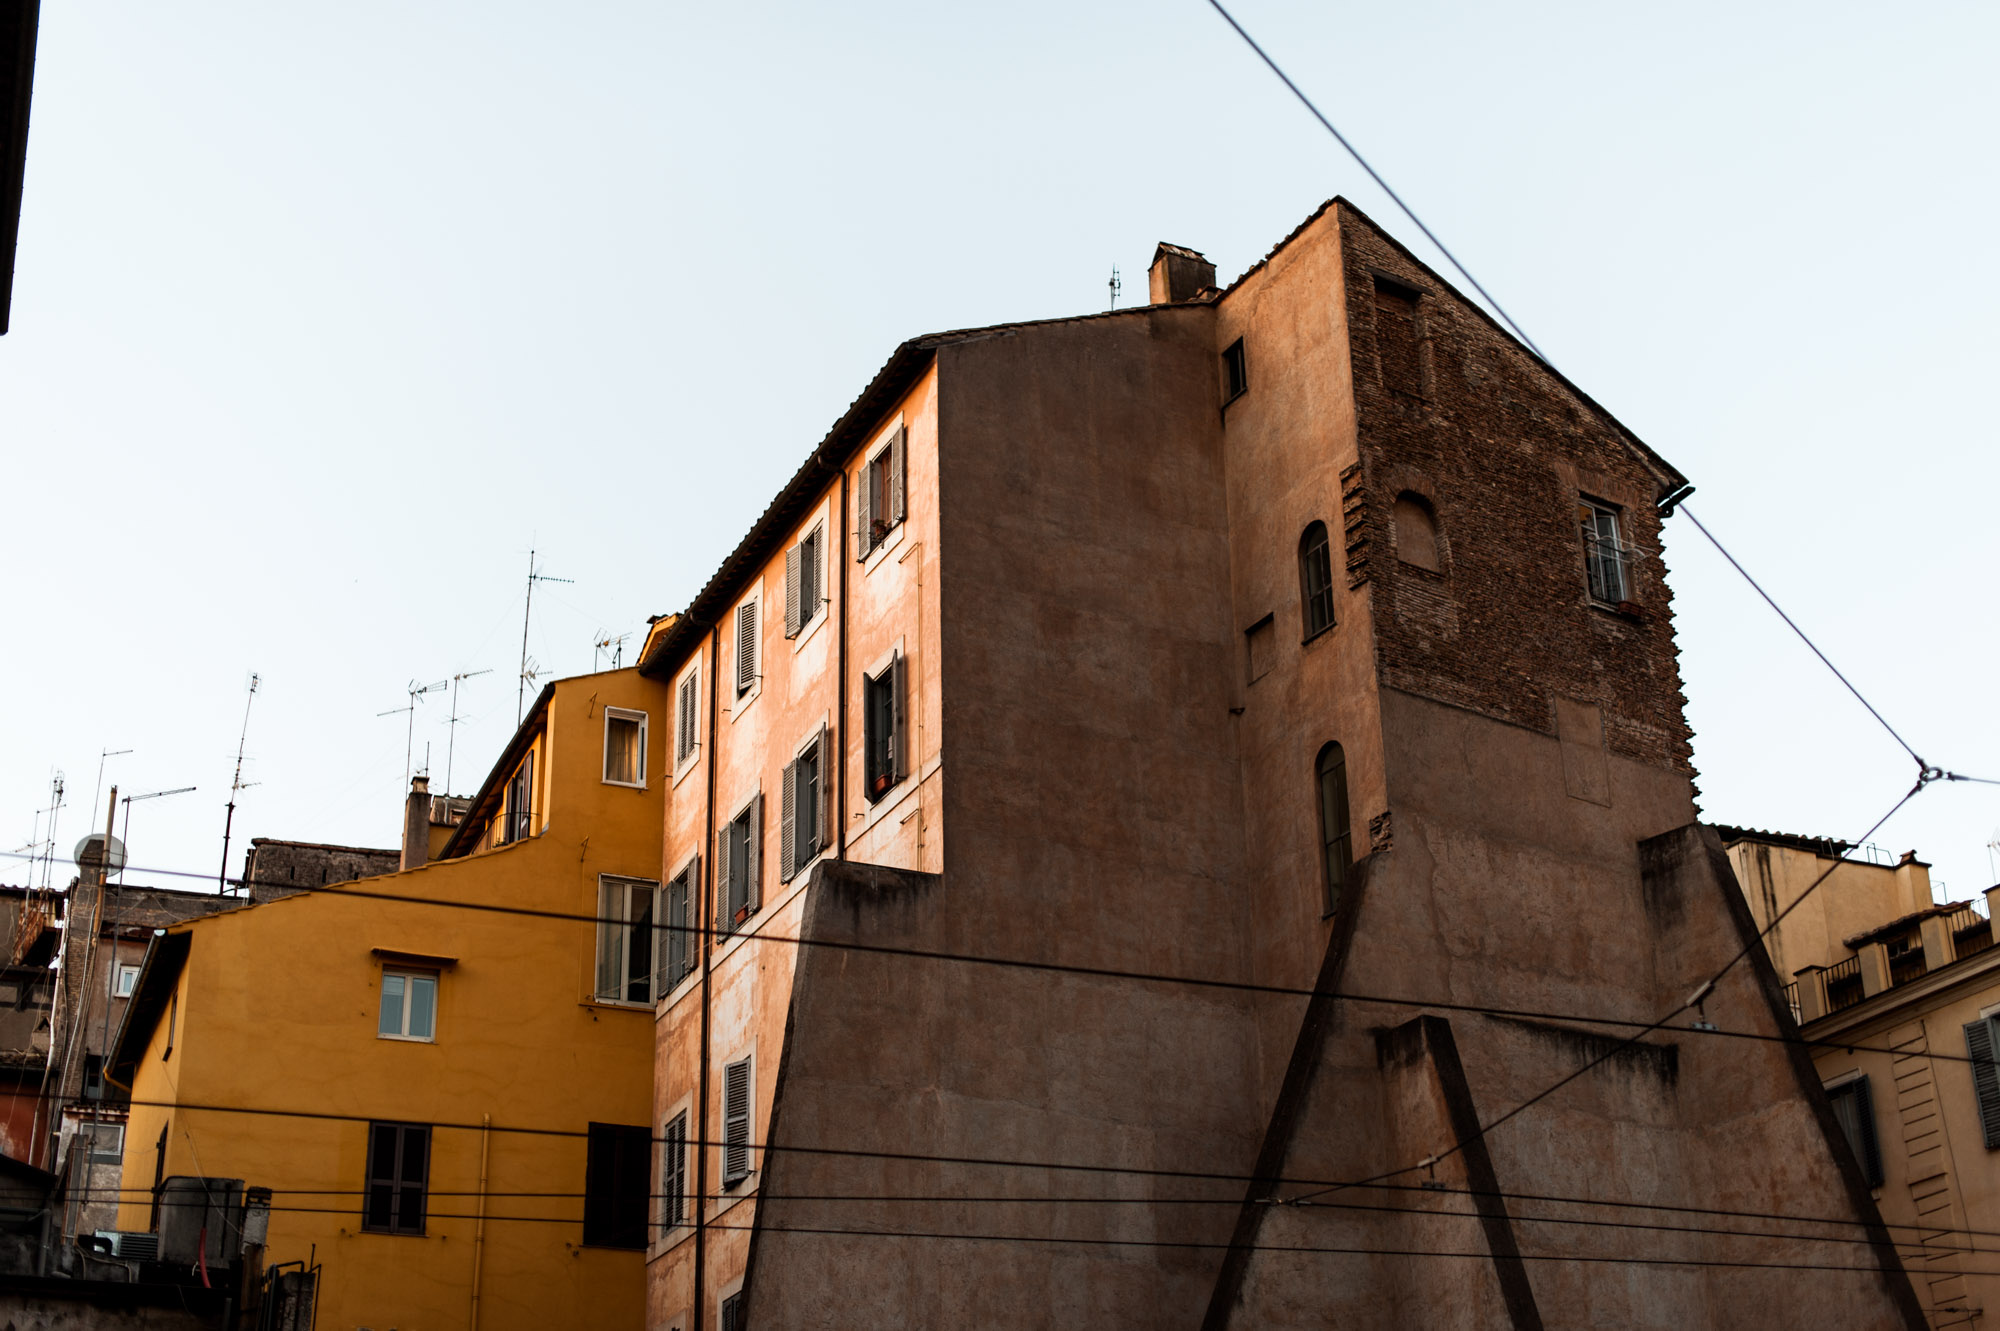 Rome, Solo Travel, Travel Photography, Brooklyn Travel Photographer